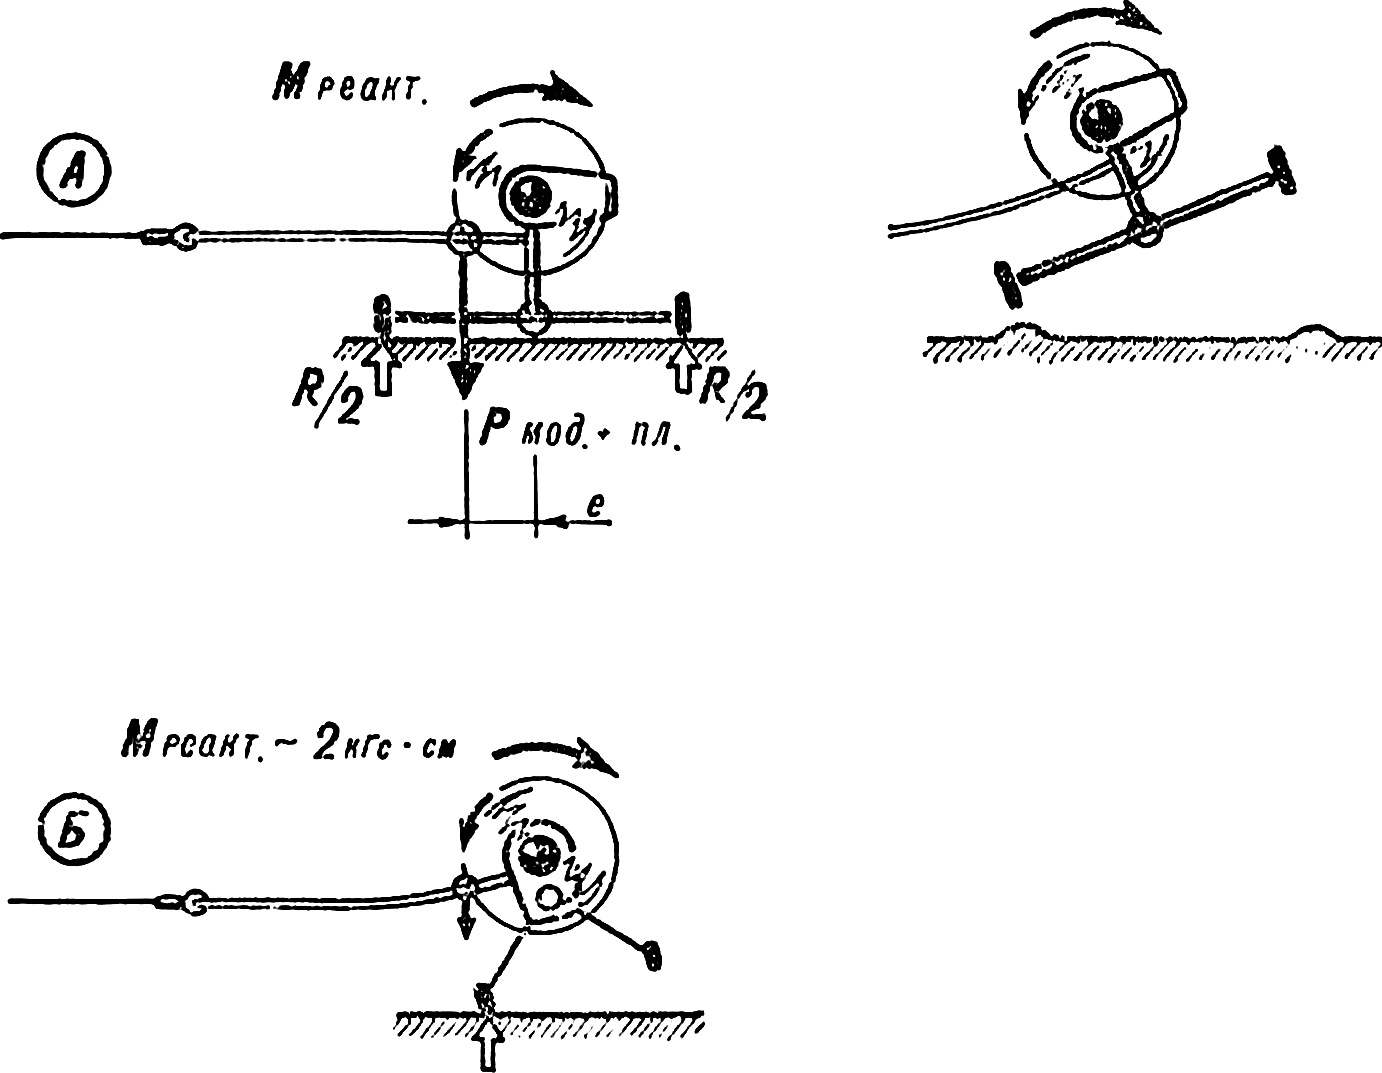 Fig. 3. Balancing cord in the box with a propeller from the front (the direction of rotation of the propeller generally accepted, providing reliable starting model).